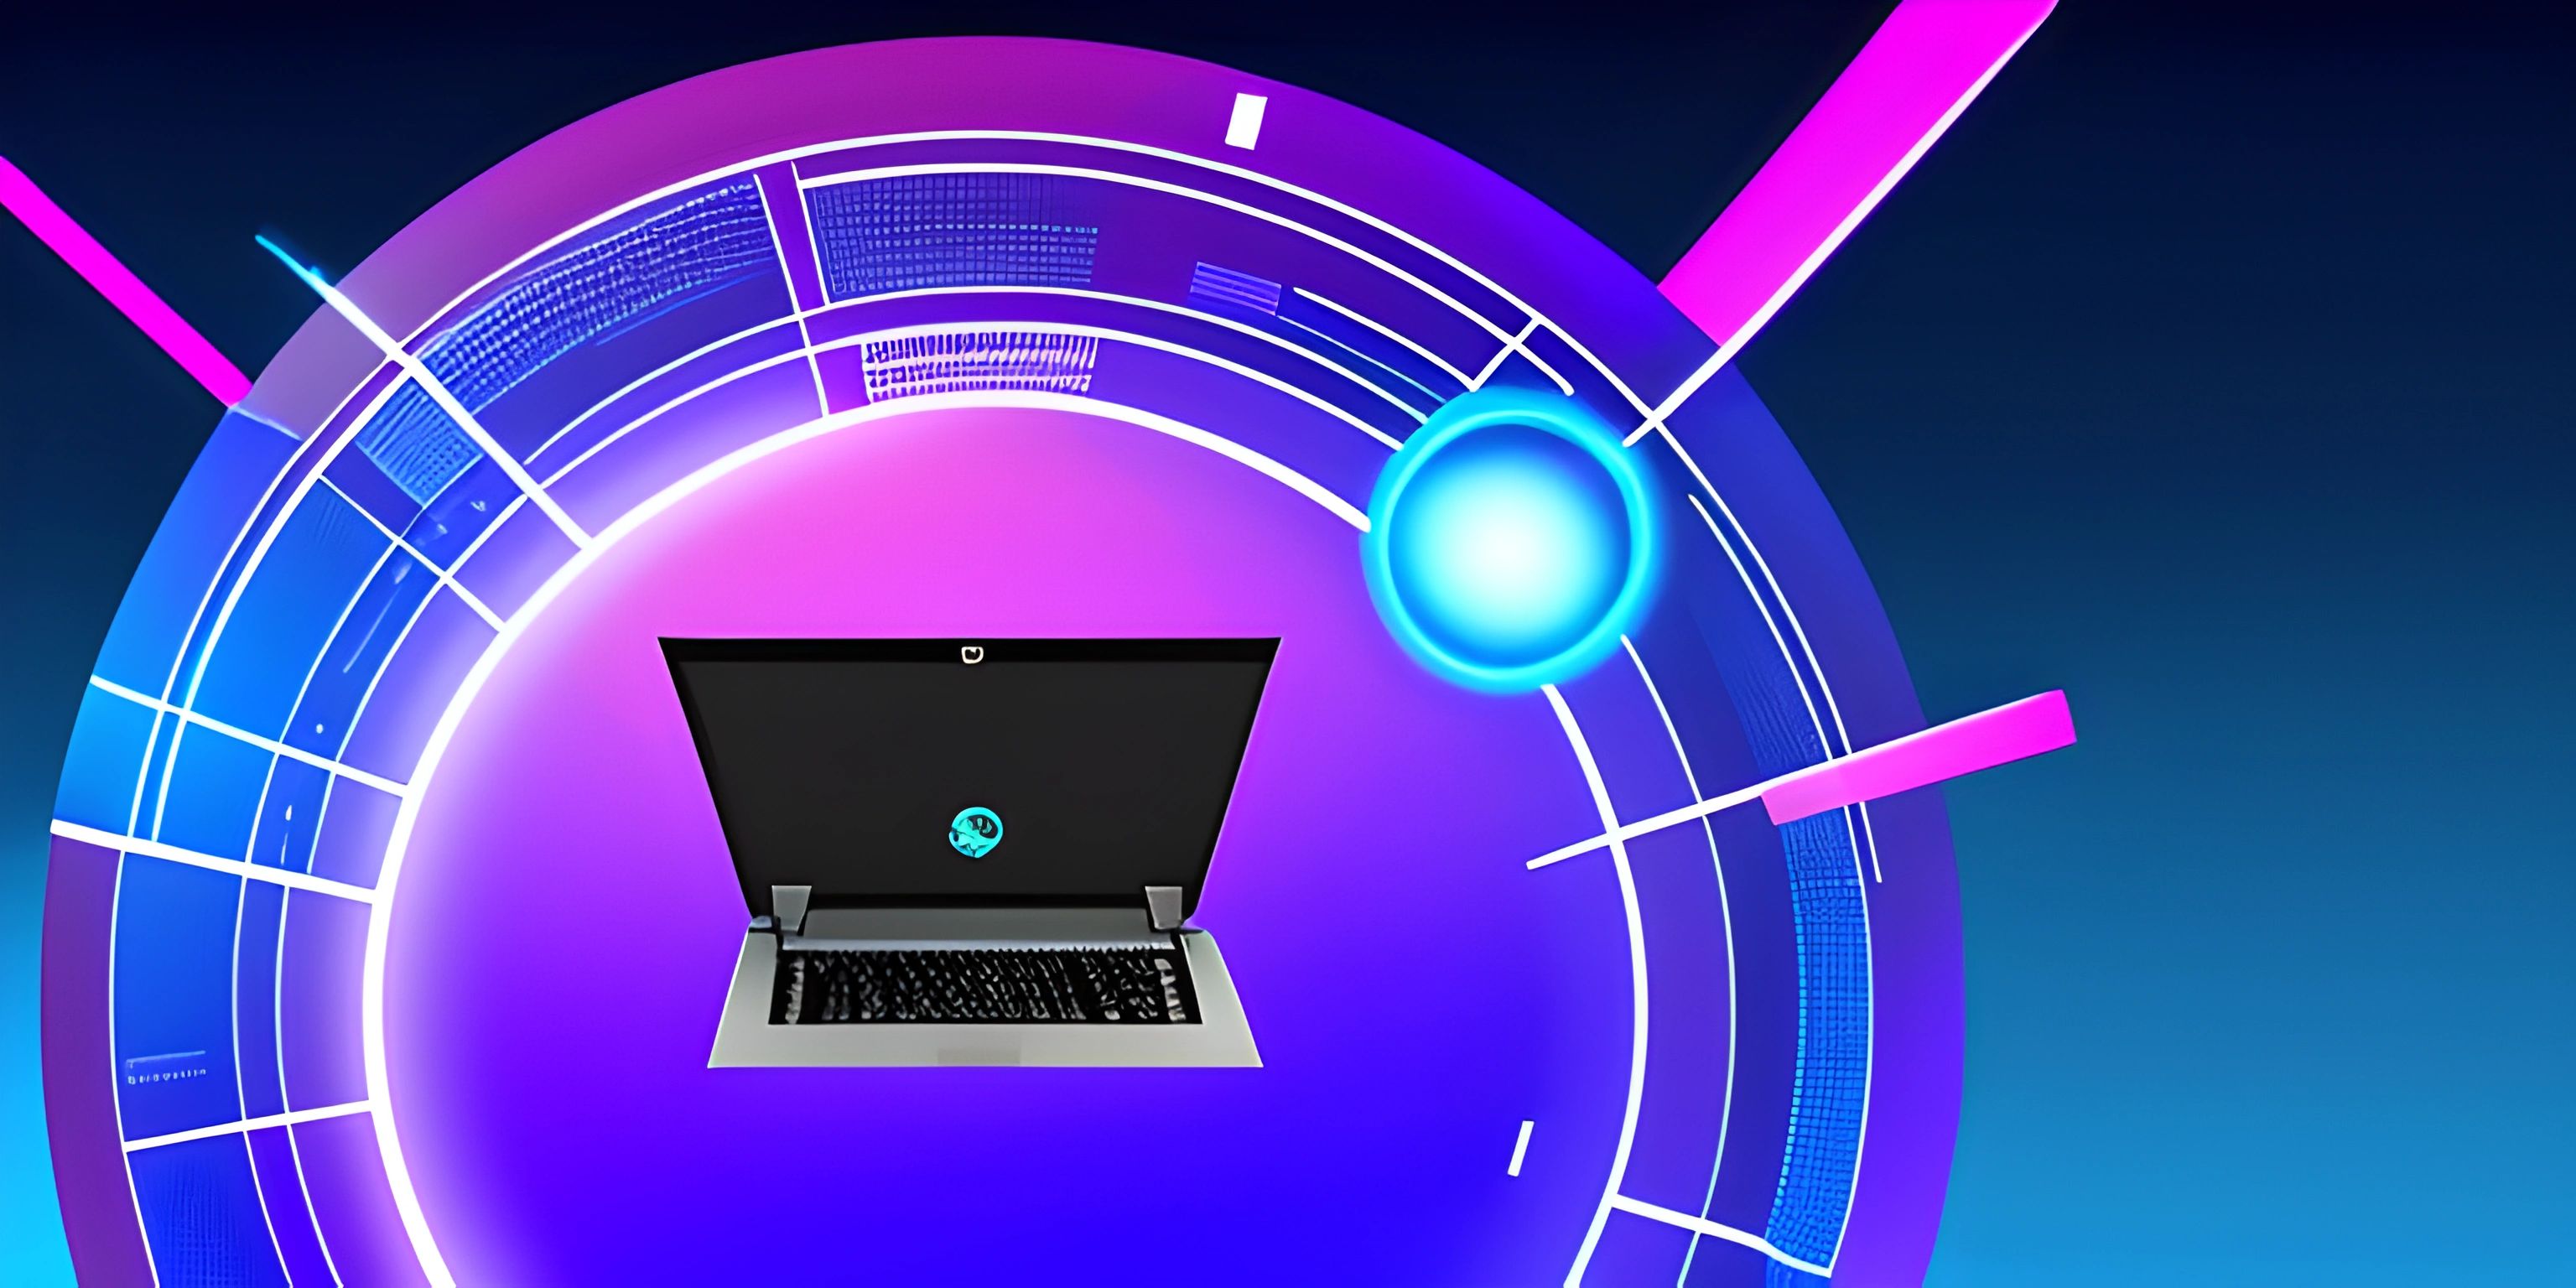 a laptop with a green button sitting in a pink circle on a blue surface in the background